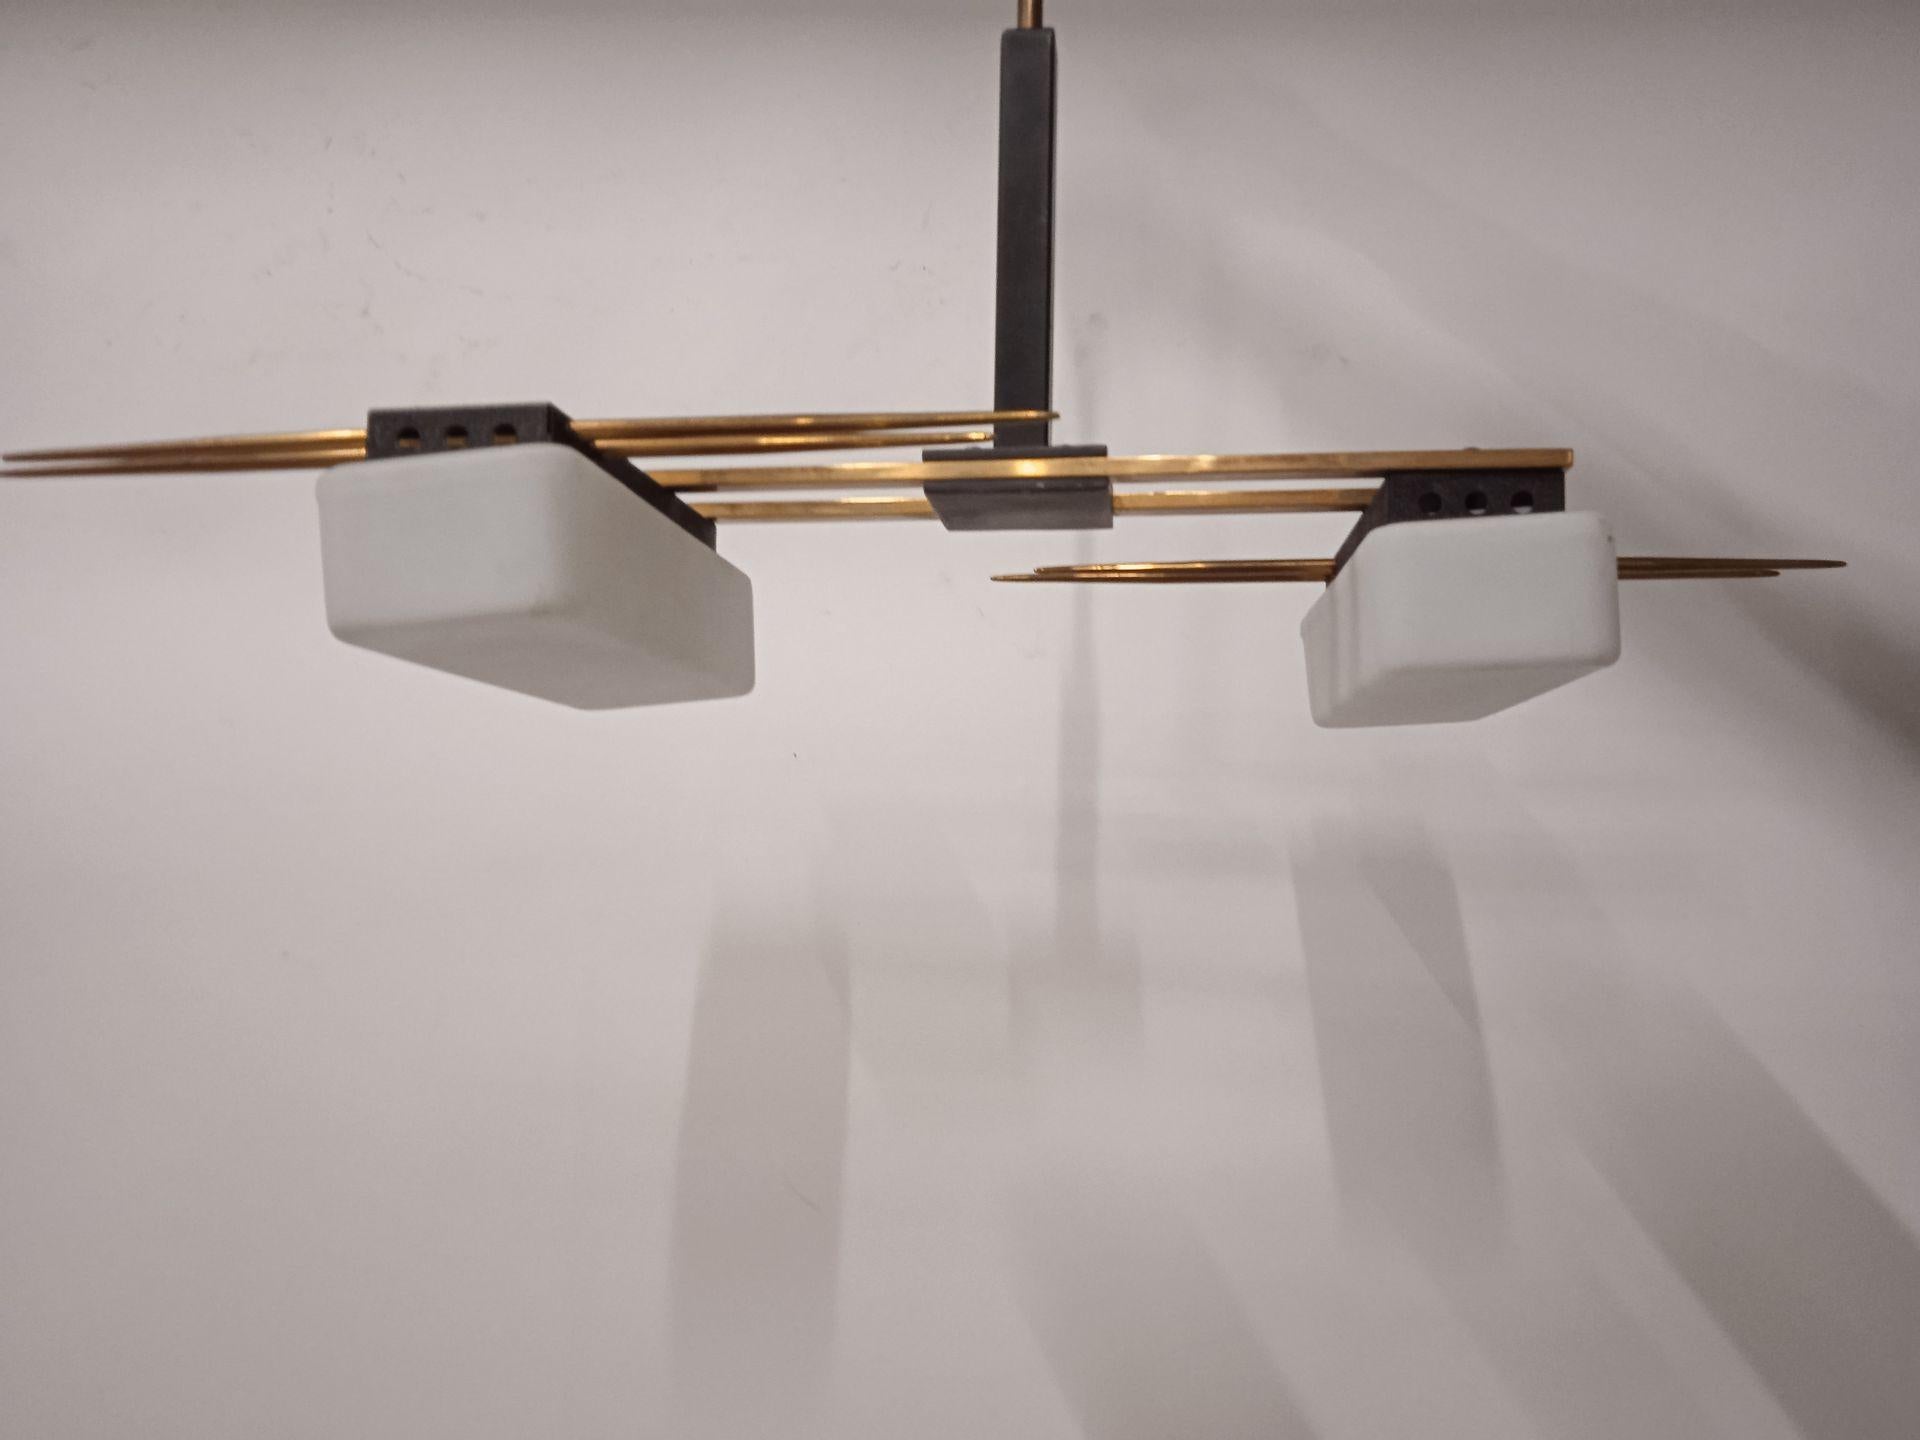 Suspension House LUNEL, around 1950

This elegant suspension, published by Maison Lunel, embodies the refined aesthetics of the design of the 1950s. Its structure in gilded brass and black lacquered metal reveals a harmonious marriage between the